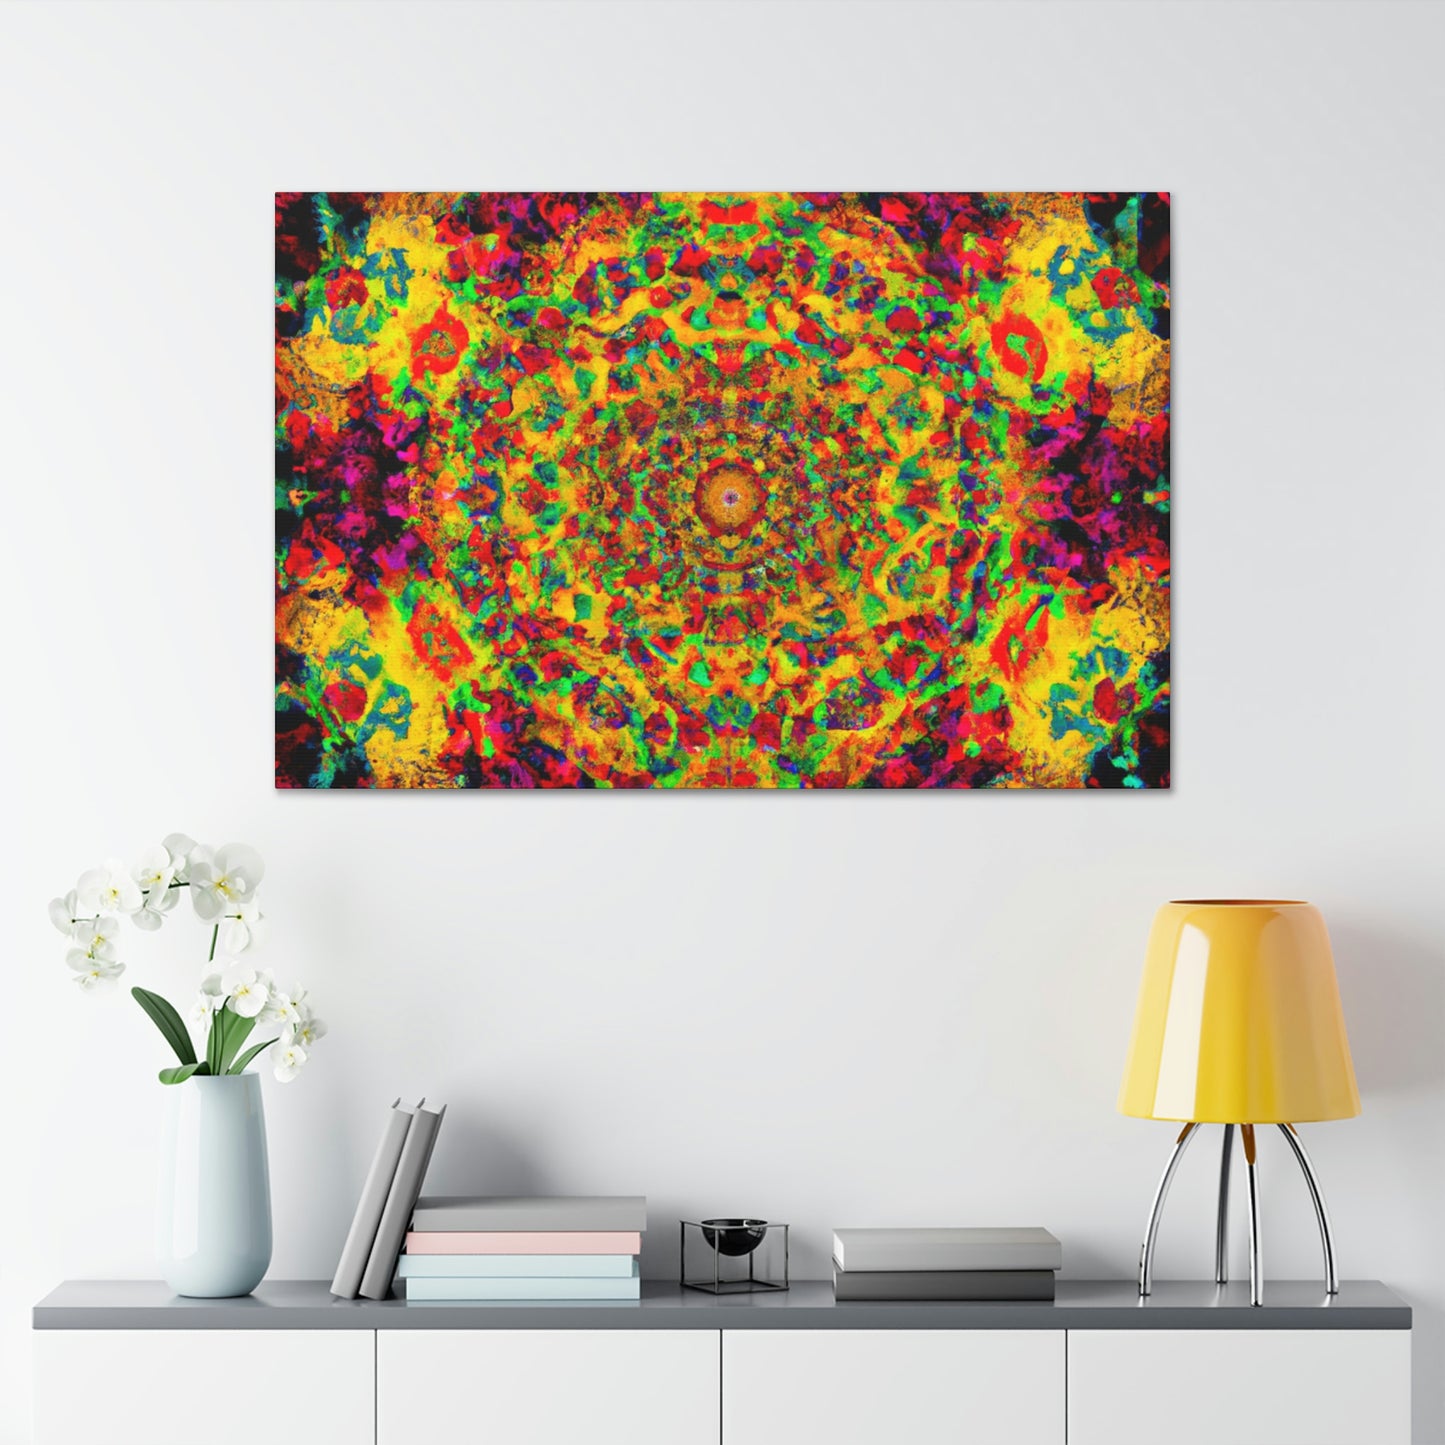 Florence Nightingale - Psychedelic Canvas